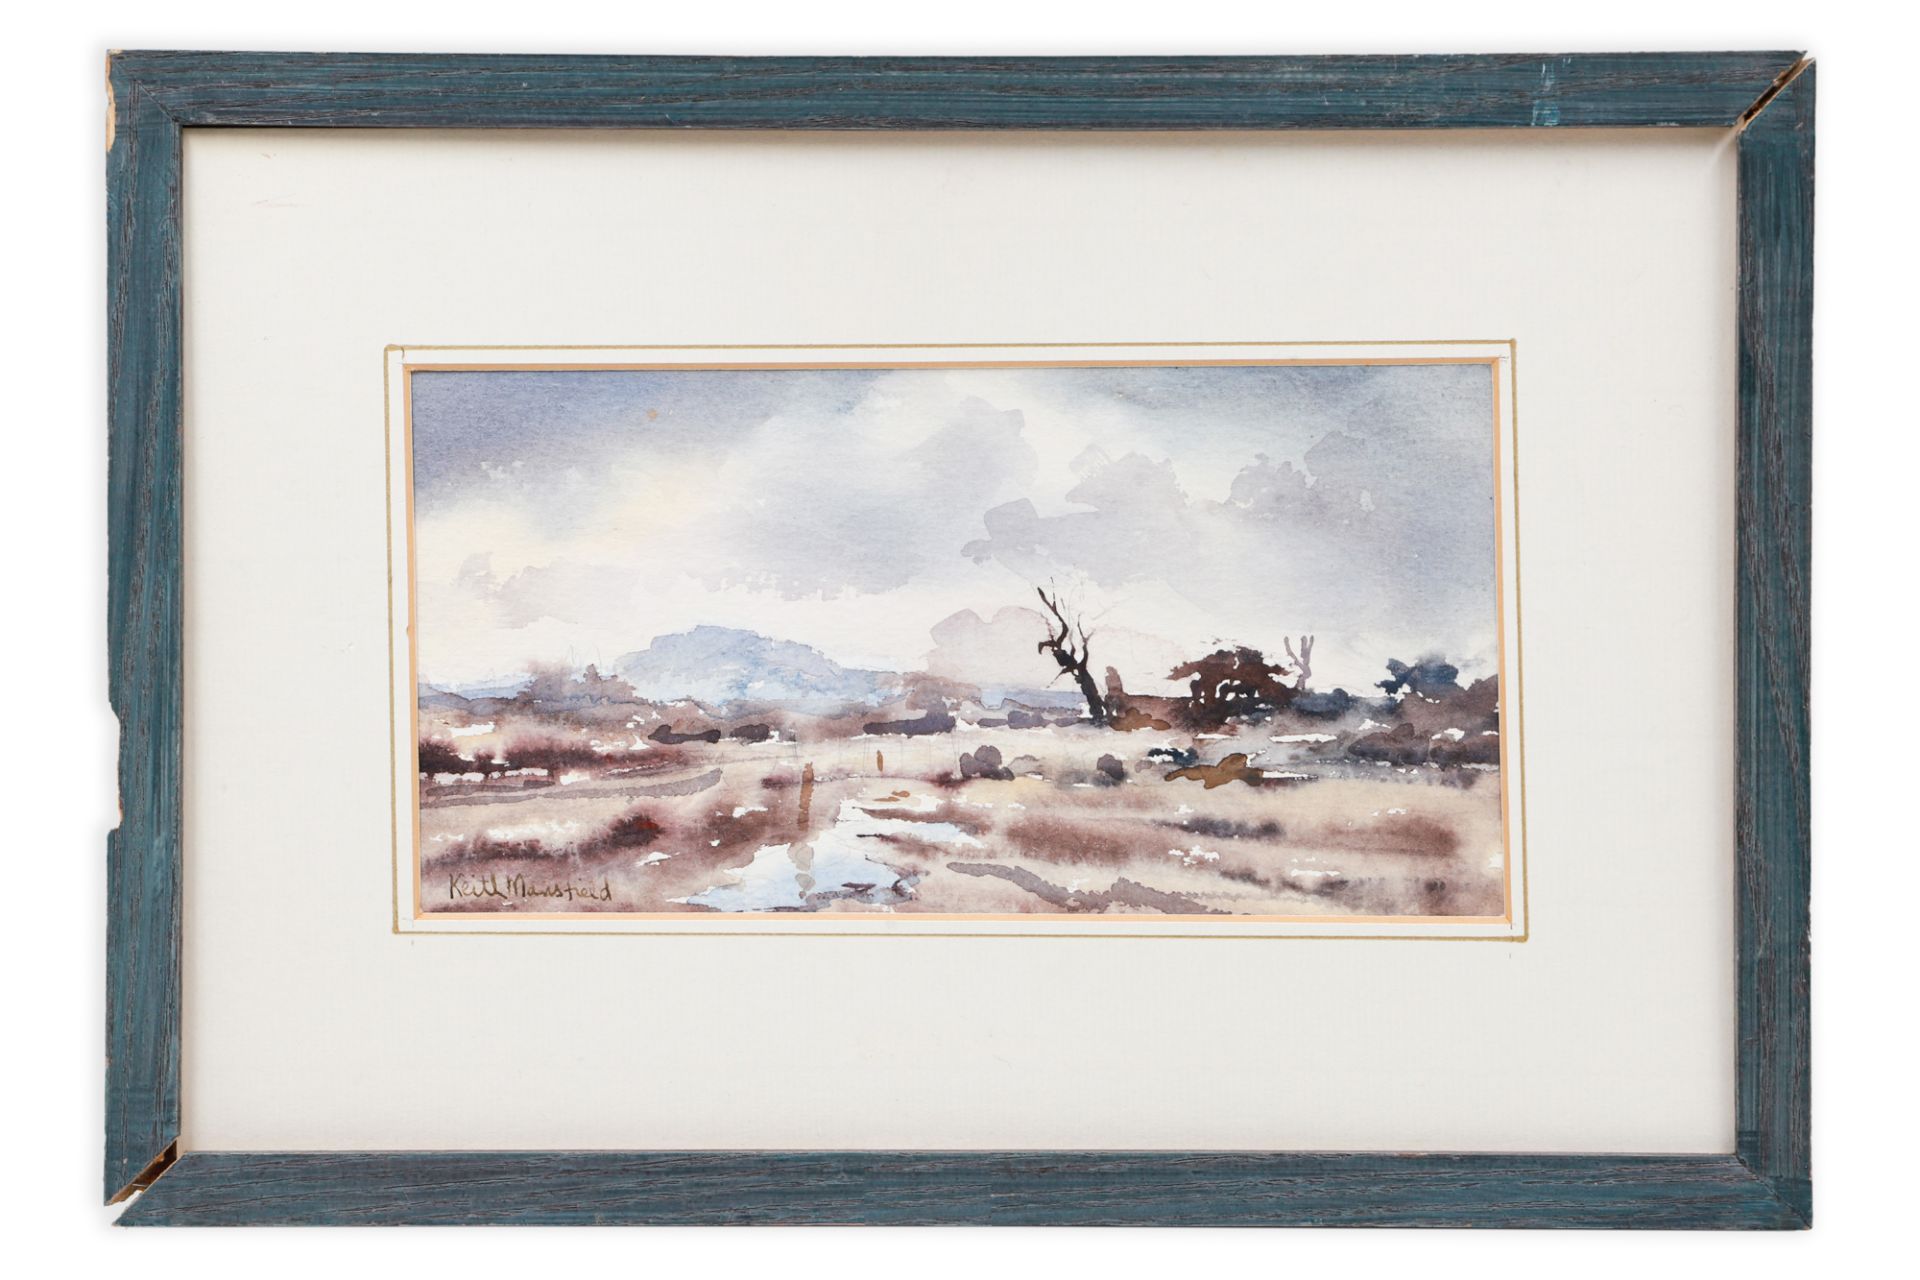 KEITH MANSFIELD (IRISH), Untitled, watercolour, framed and signed, 13" x 9", together with another